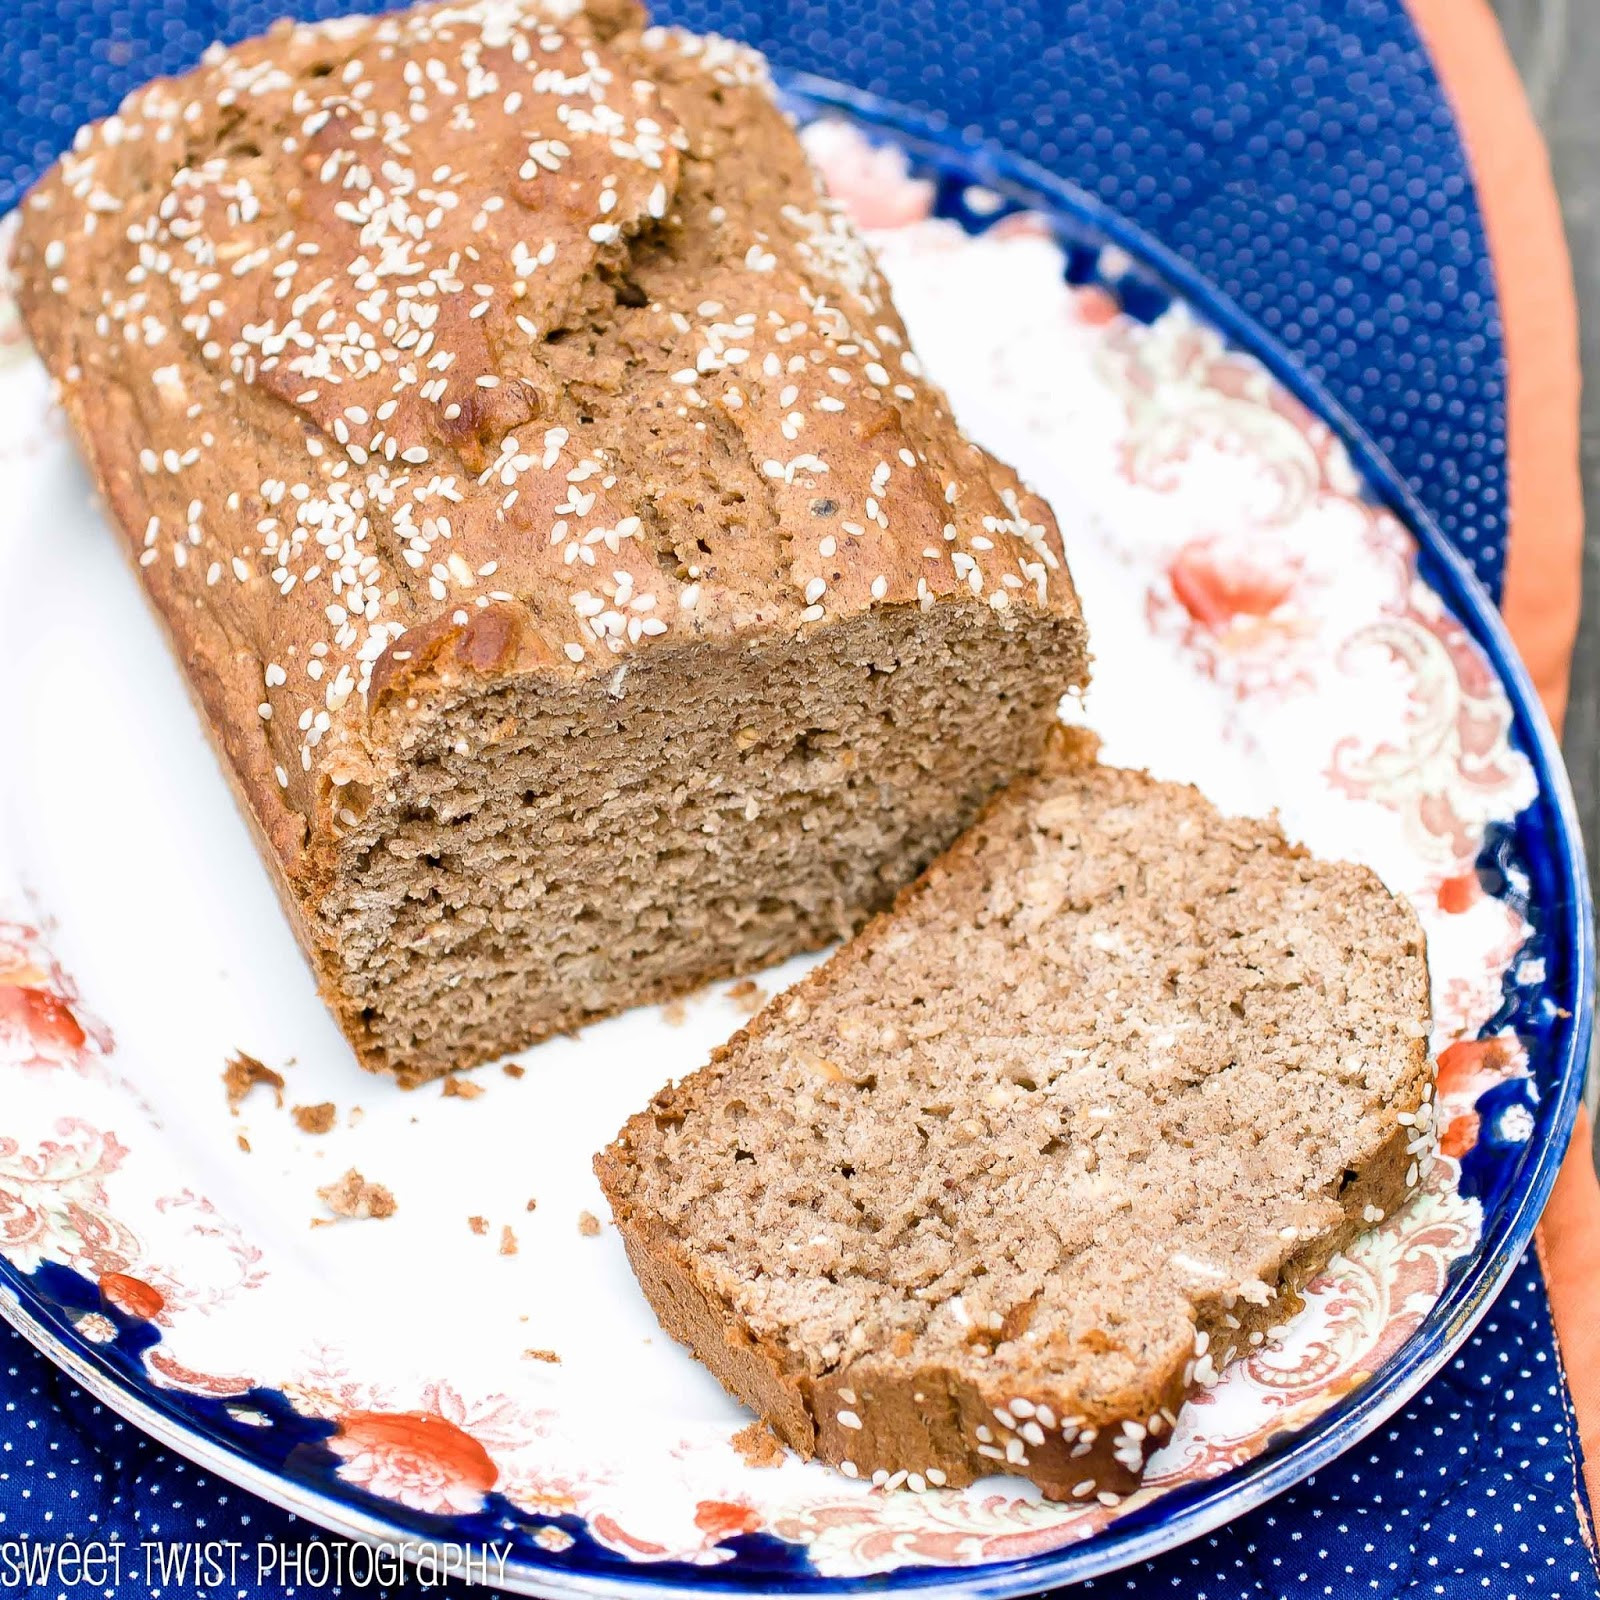 Healthy Bread Machine Recipes Weight Loss
 Sweet Twist of Blogging Weight Loss Wednesday & Healthy